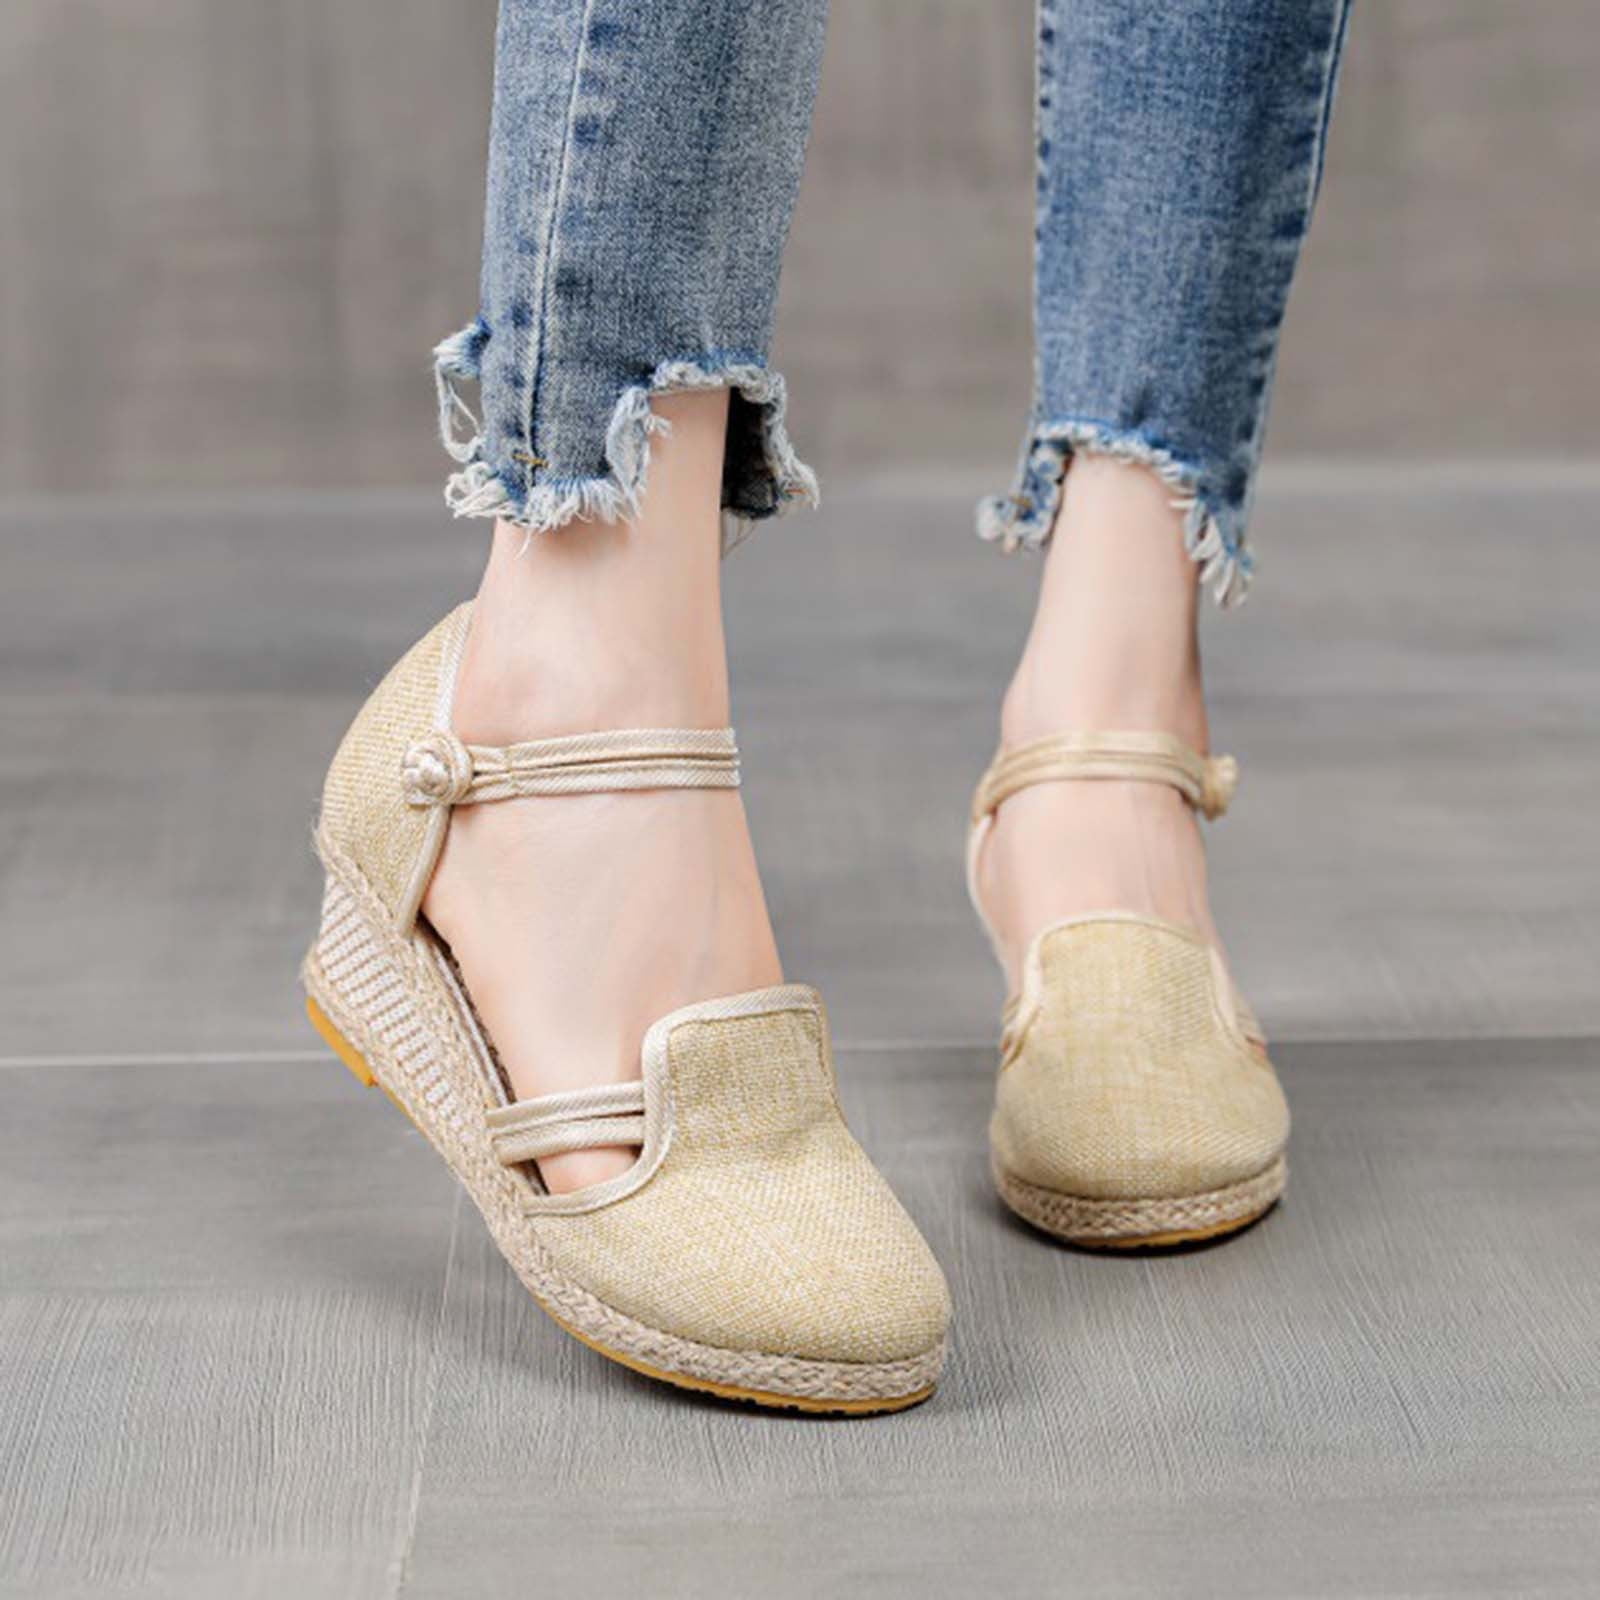 WOMENS LADIES LOW Heel Wedge Espadrilles Summer Sandals Casual Holiday Size  New £18.99 - PicClick UK